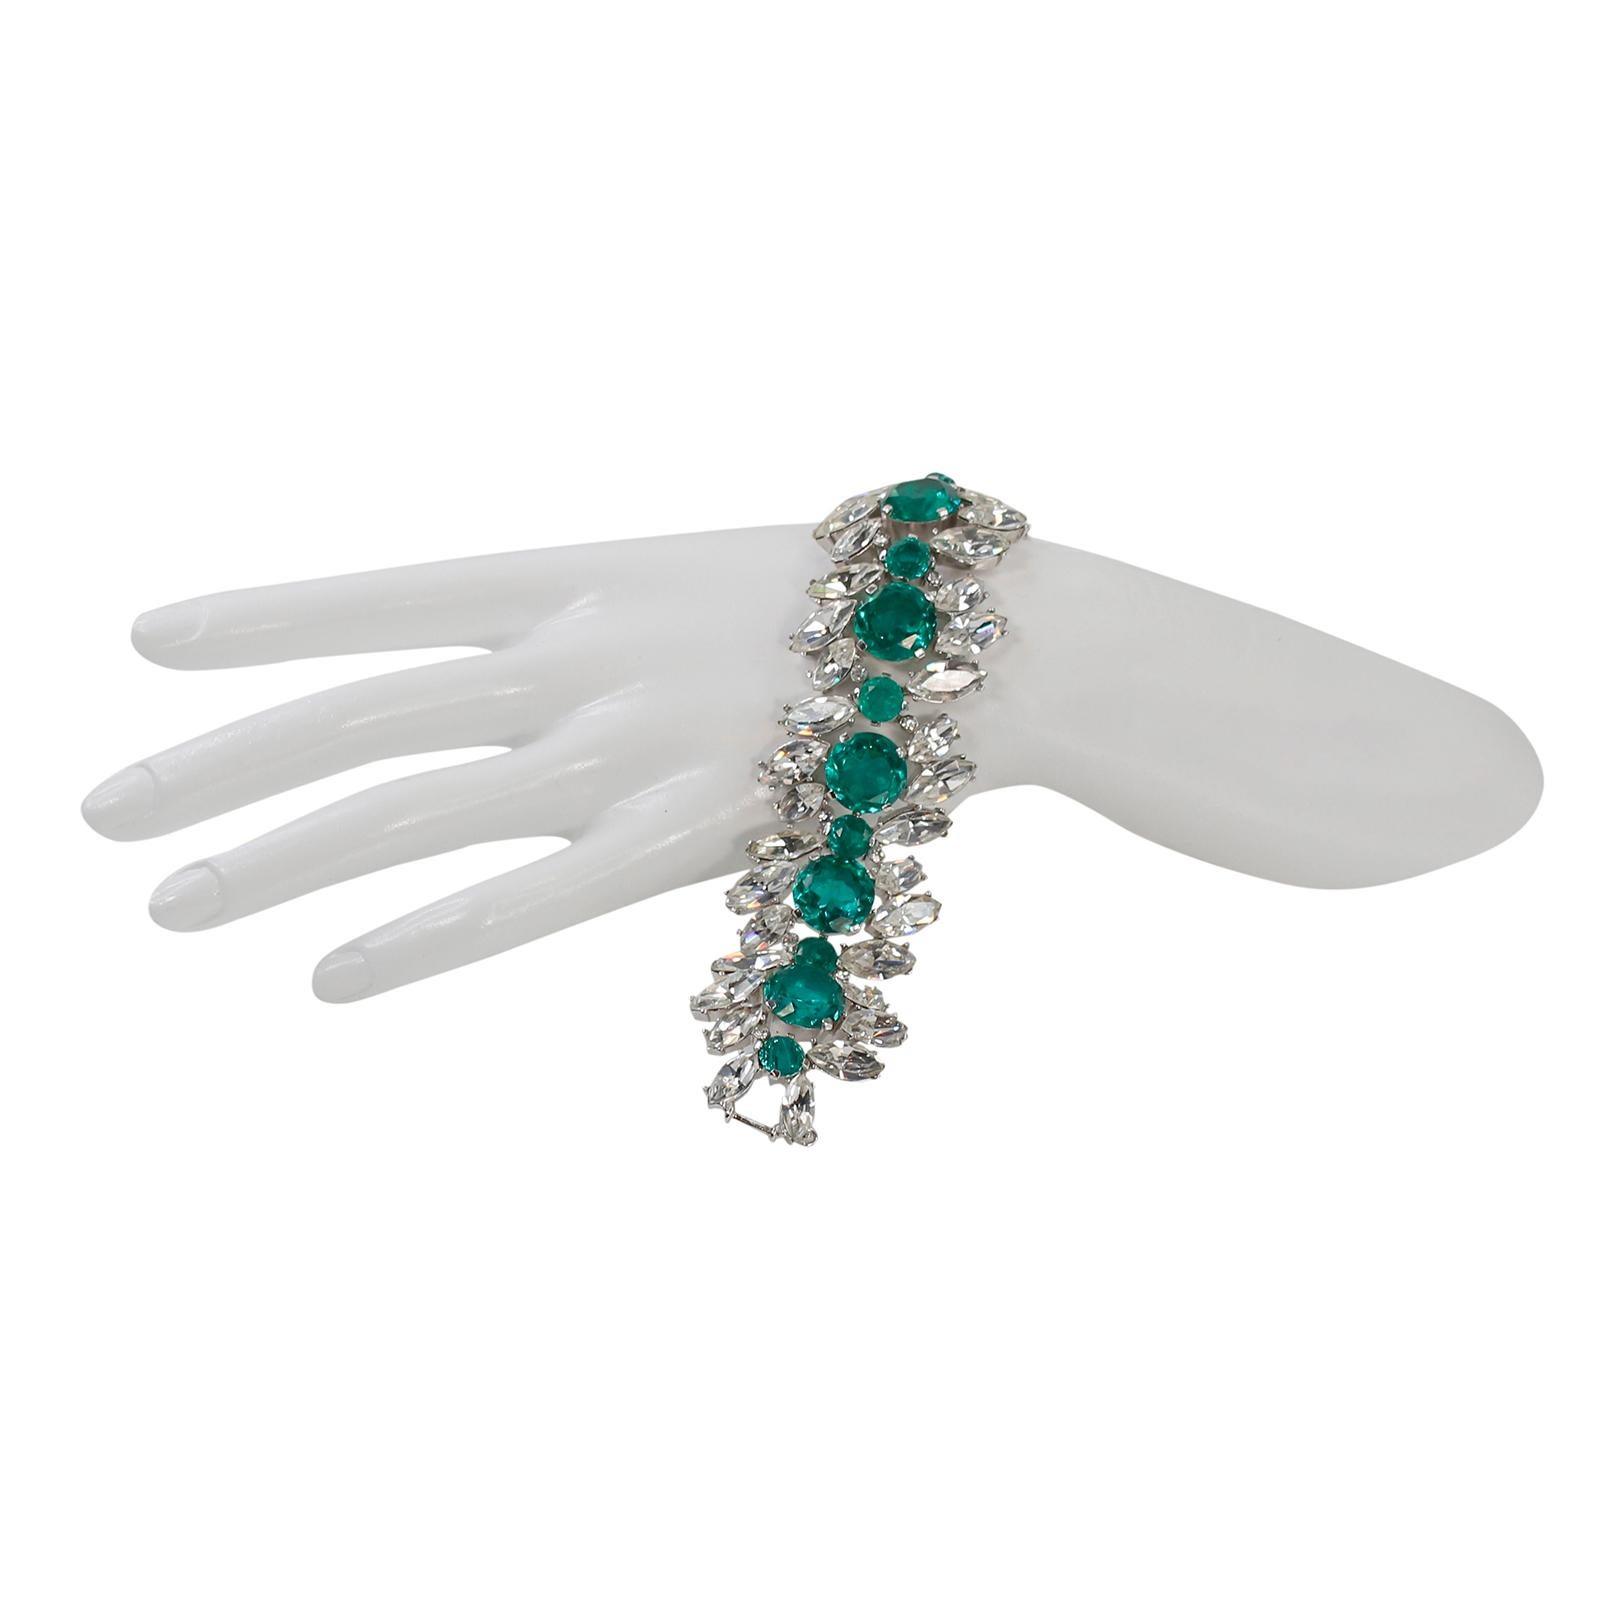 Women's Vintage Trifari Emerald Green and Crystal Bracelet Circa 1960s For Sale